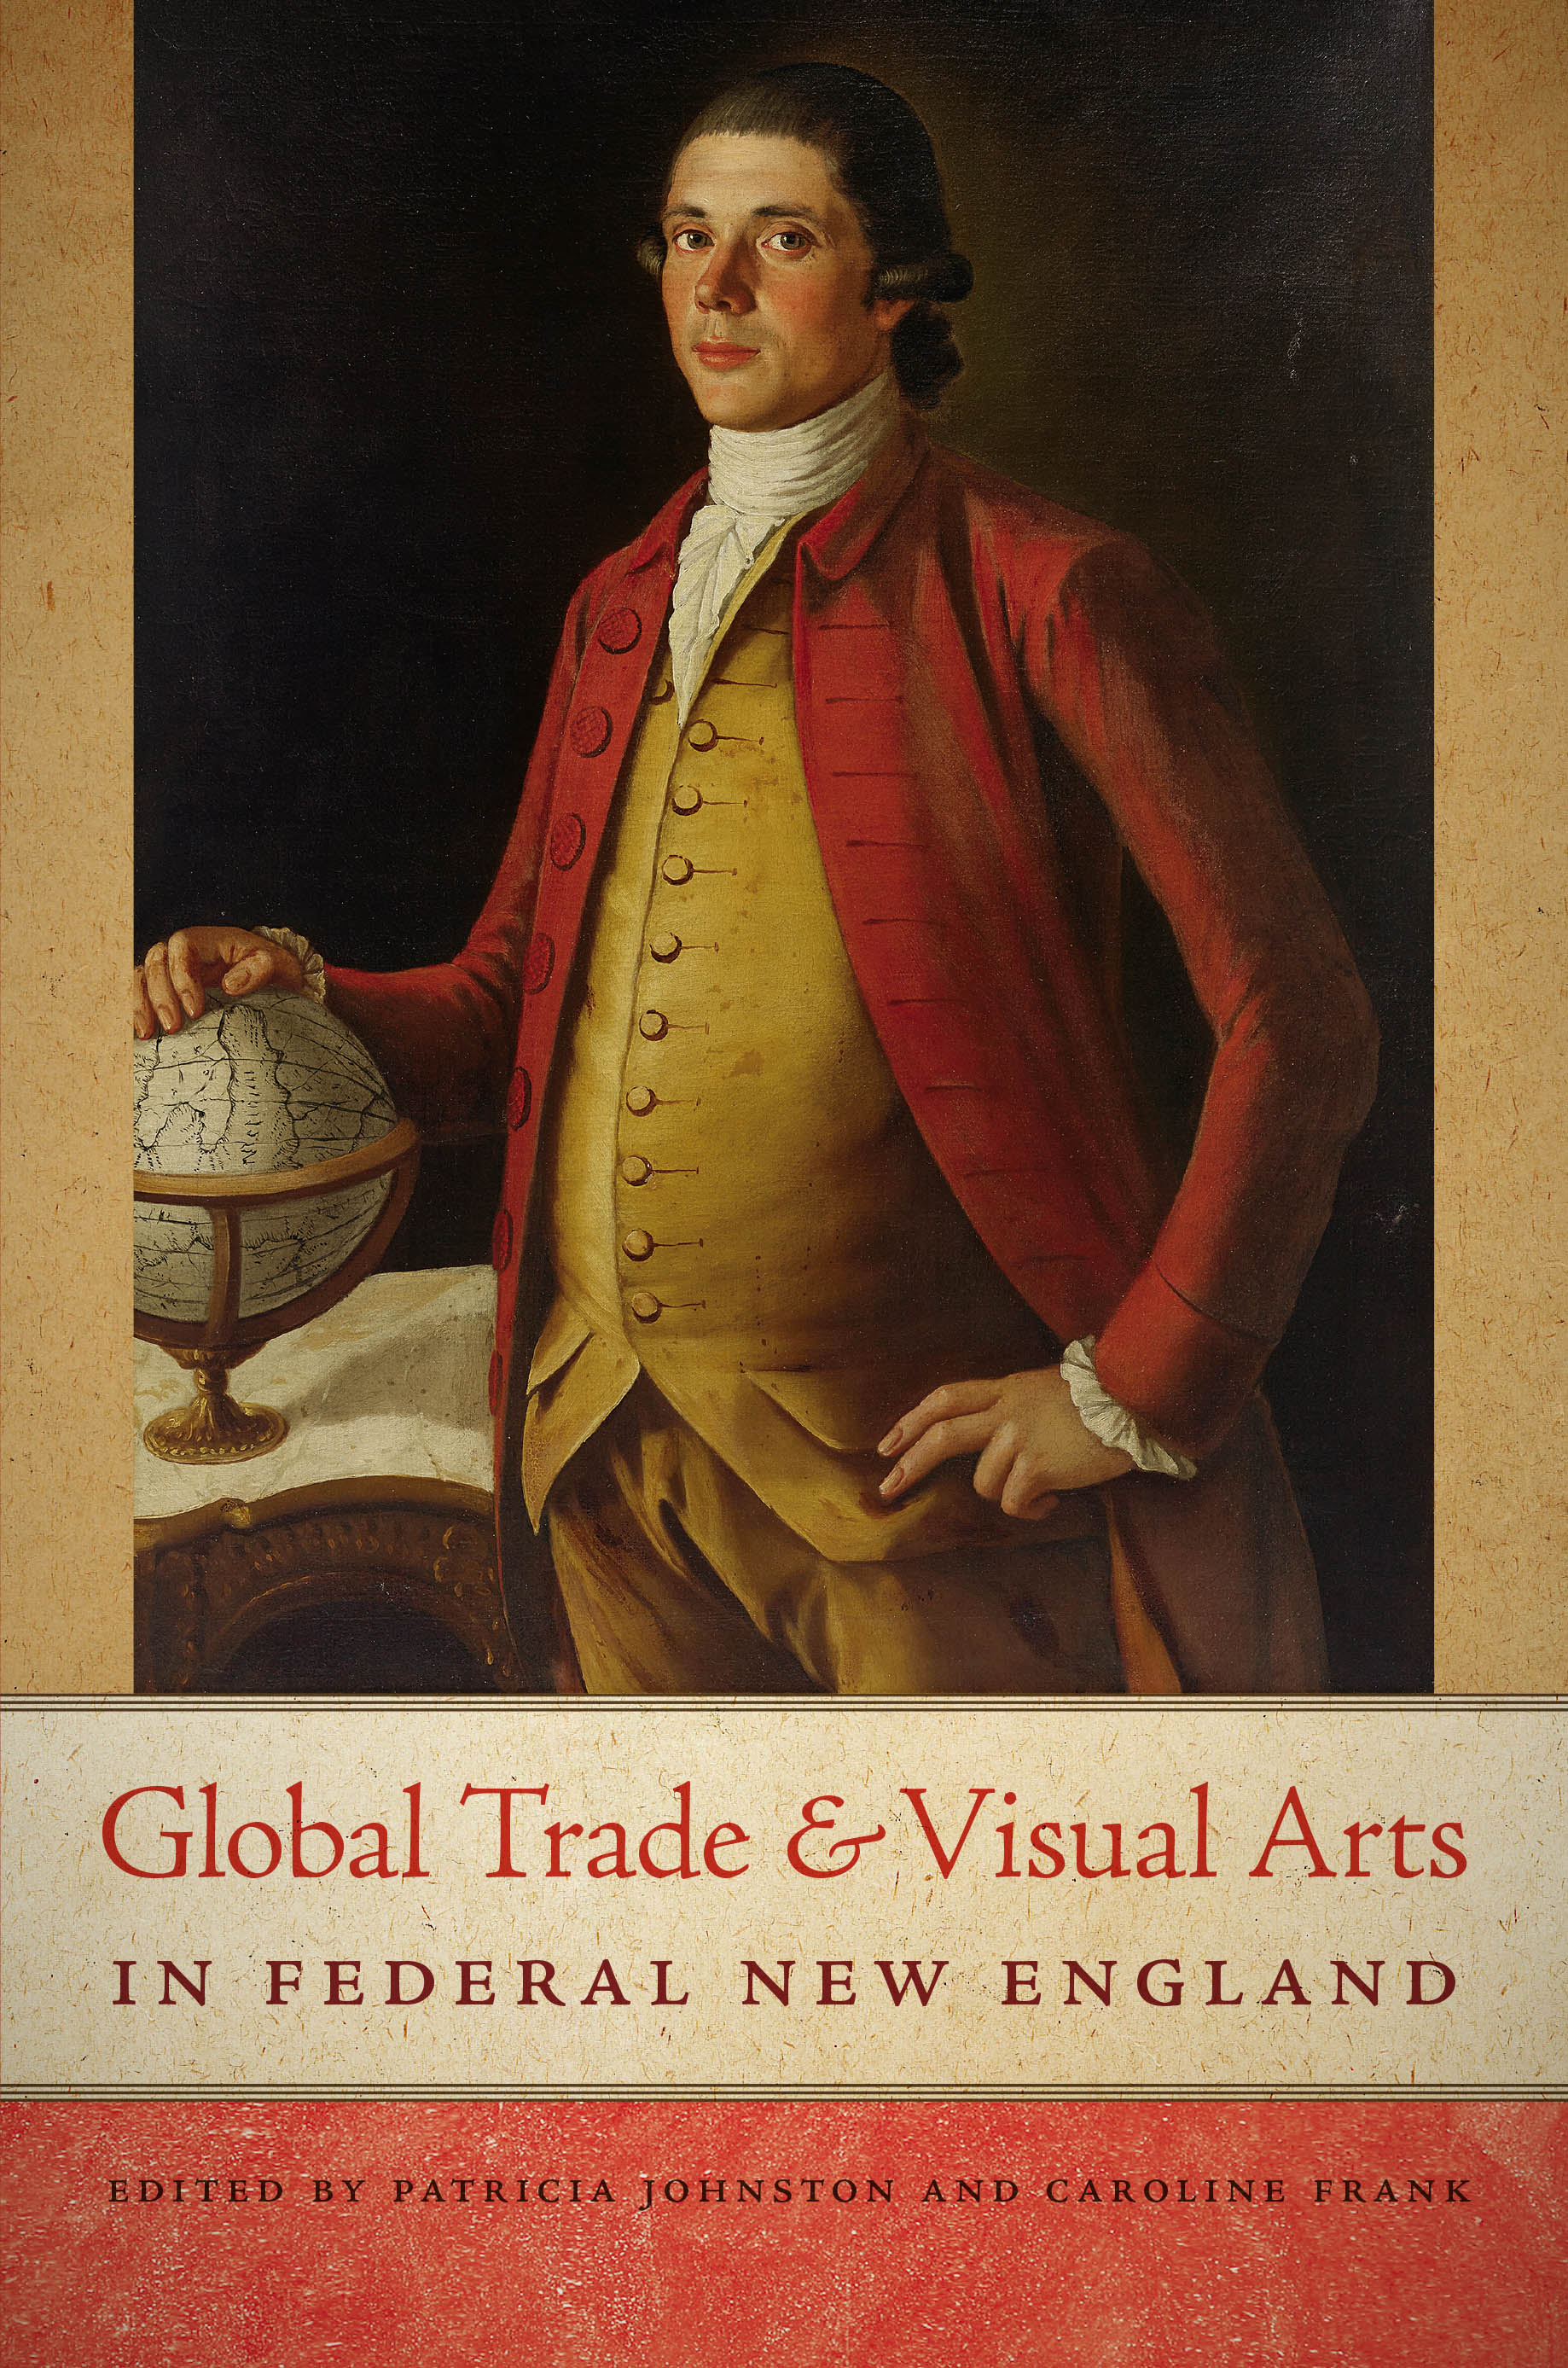 Global Trade and Visual Arts in Federal New England